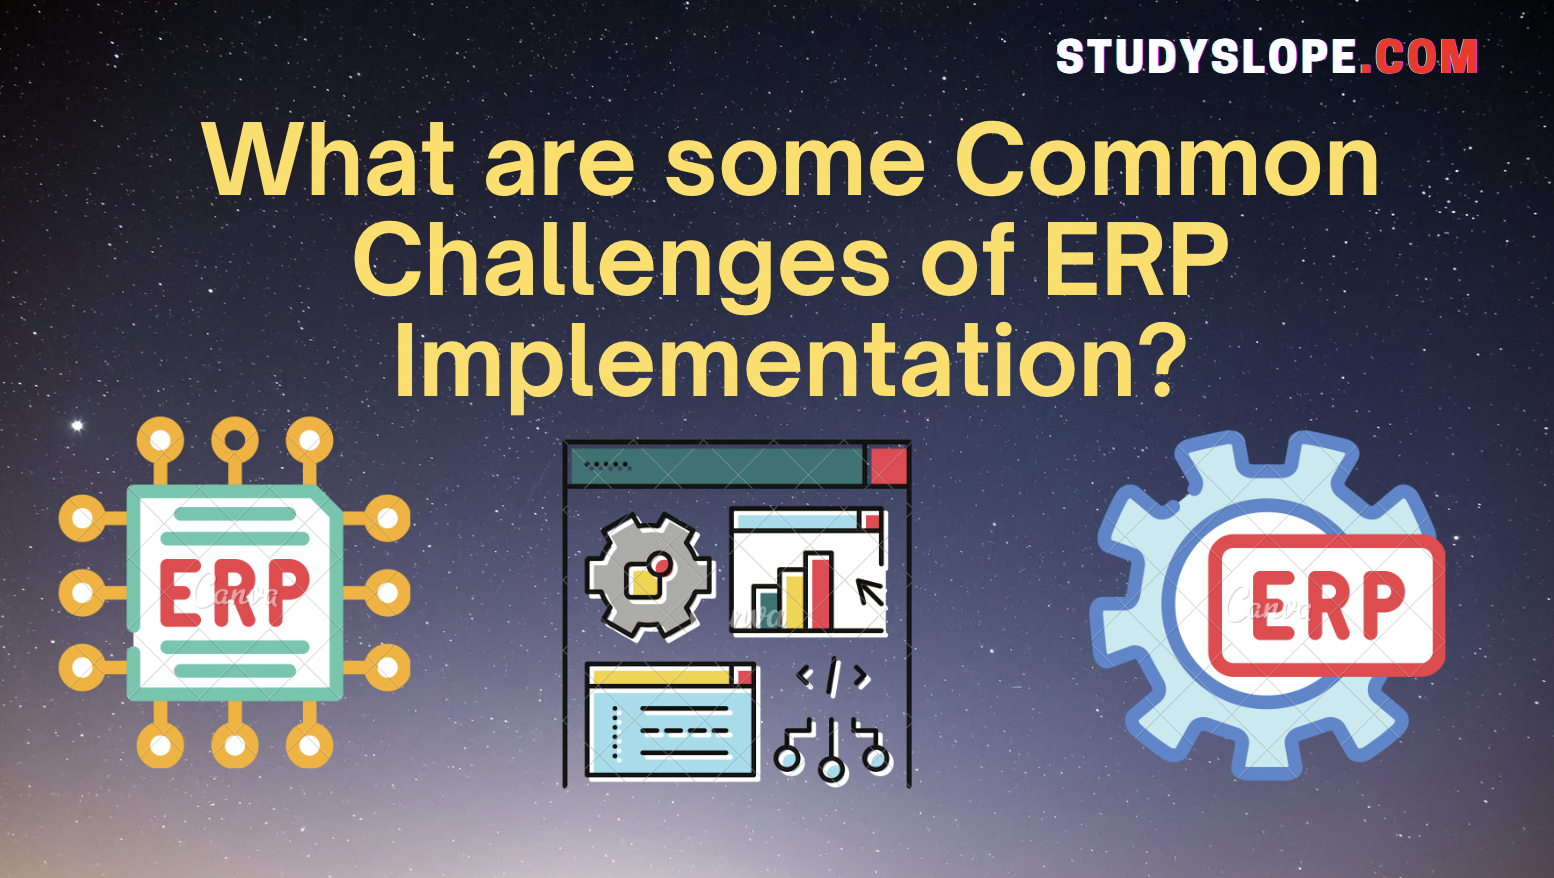 Common Challenges of ERP Implementation